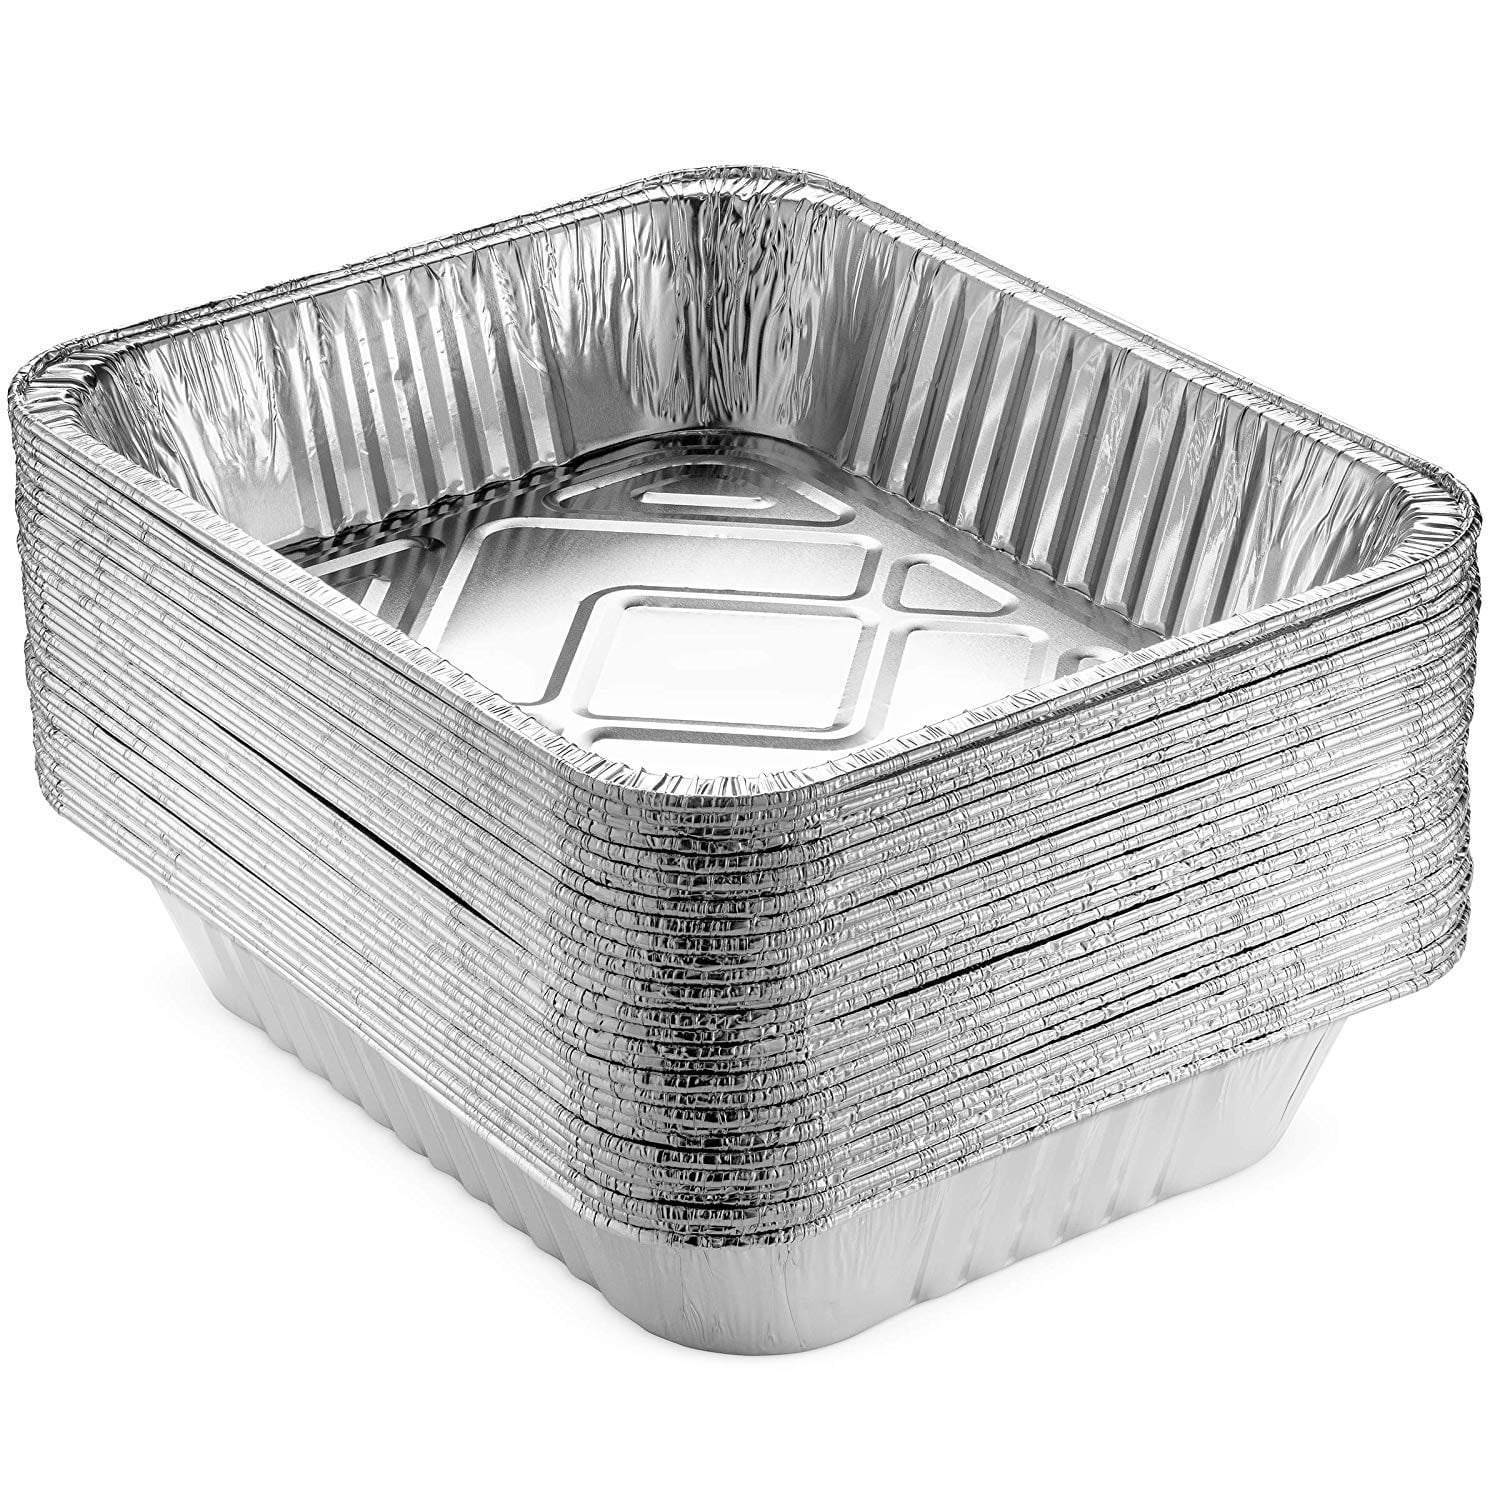 3 x VERY LARGE EXTRA DEEP DISPOSABLE ALUMINIUM FOIL ROASTING DISH CATERING TRAY 